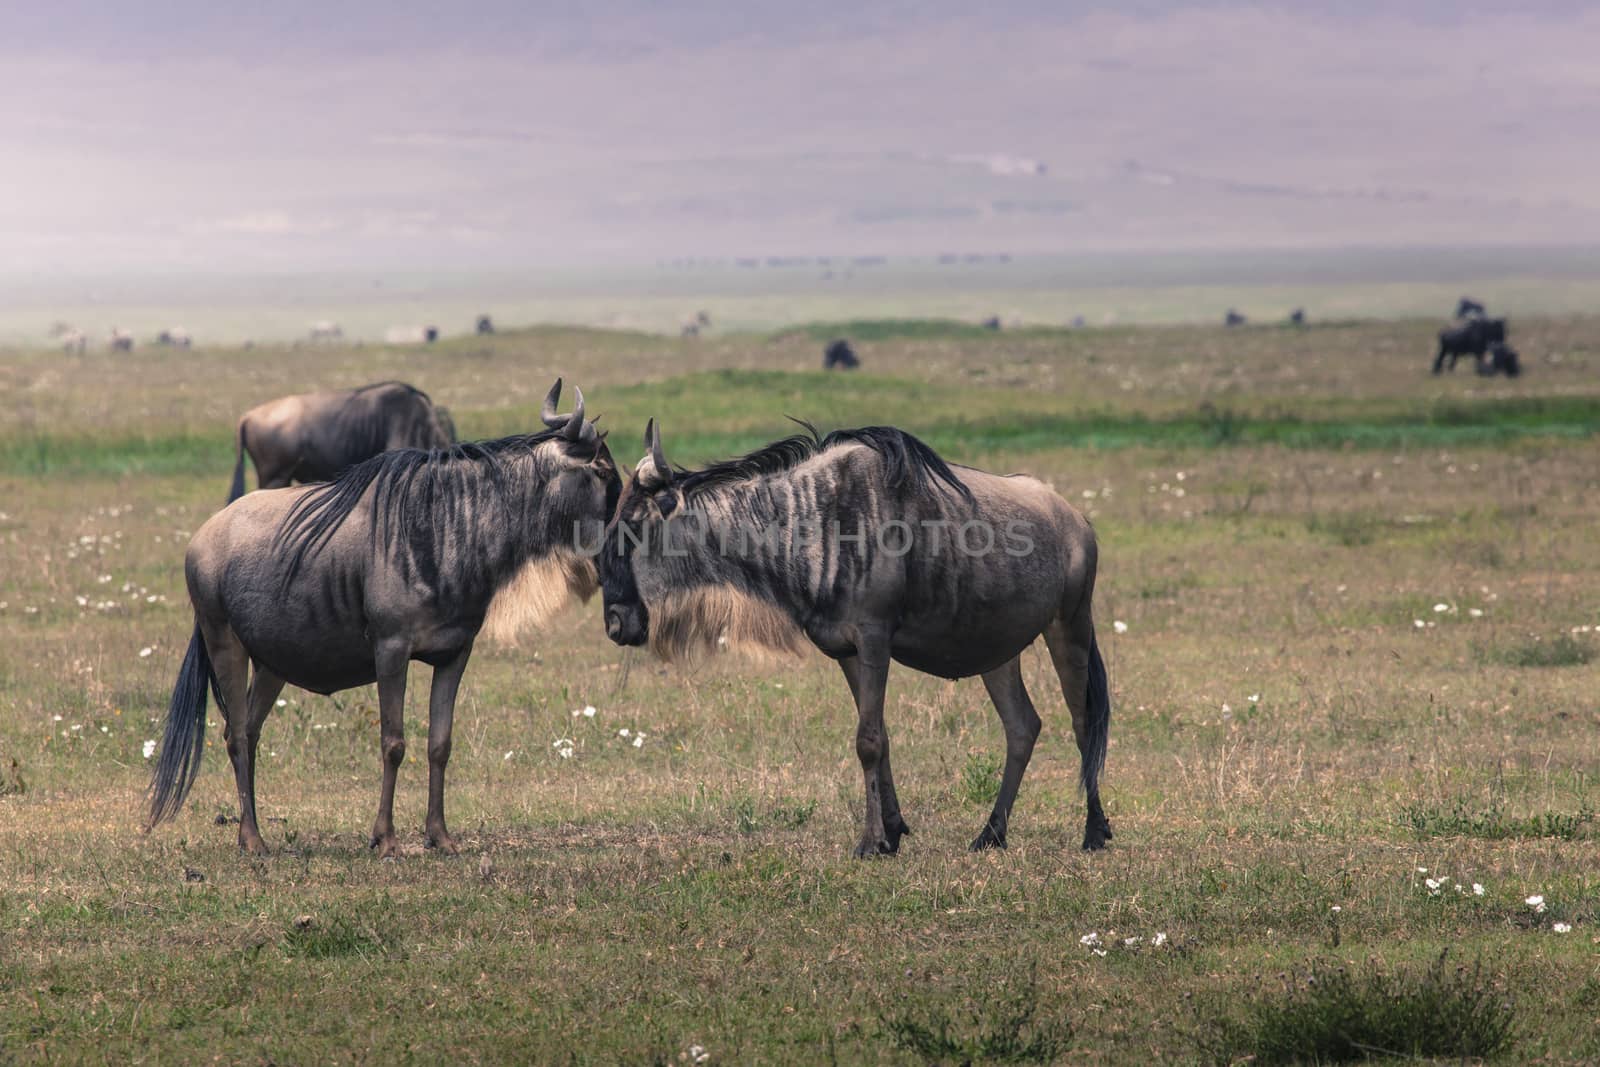 A Wildebeest mother and newly born calf, Ngorongoro Crater, Tanzania.